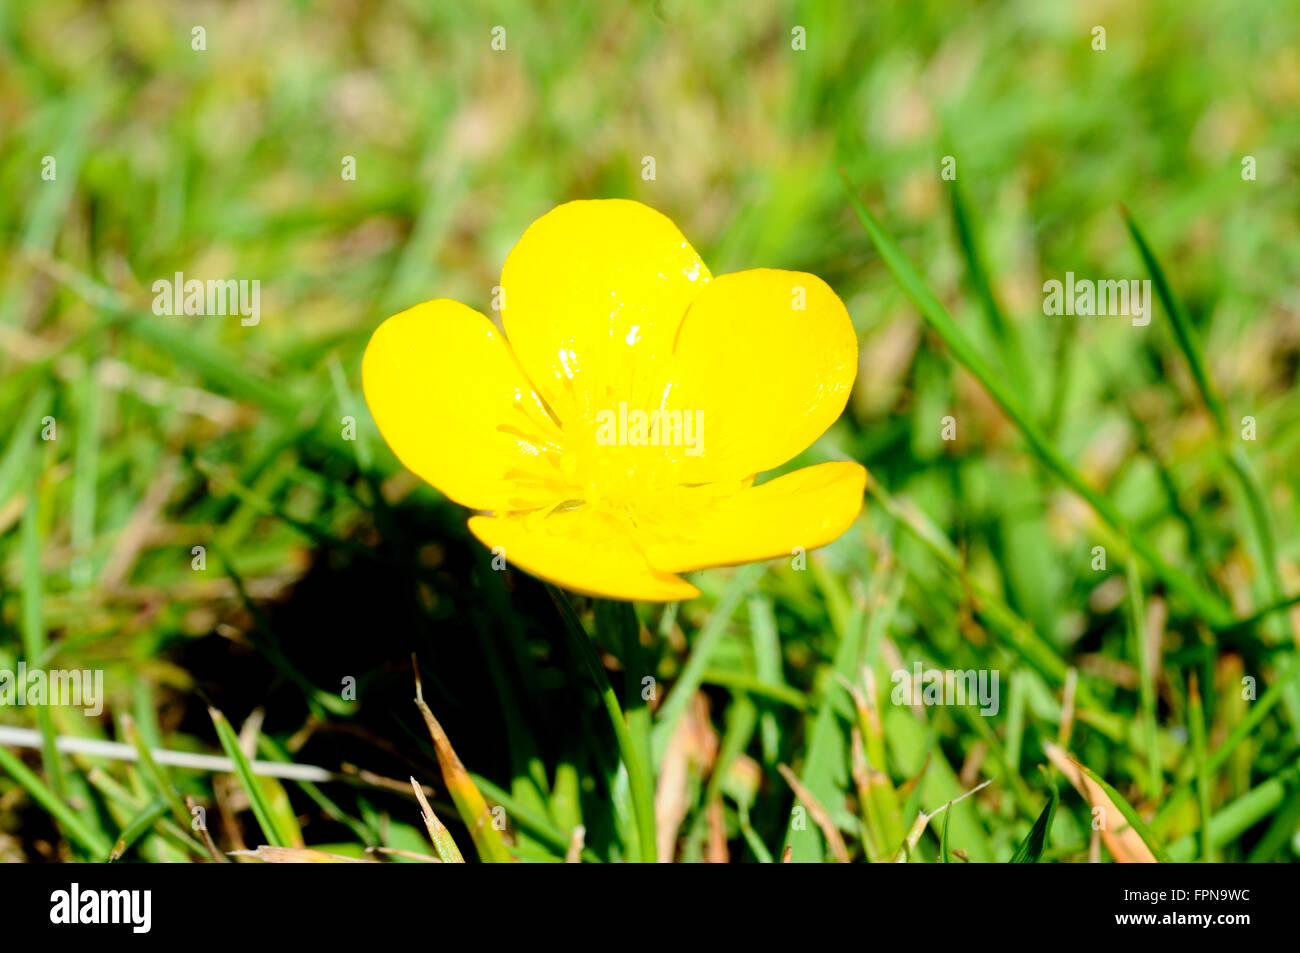 Yellow Buttercup surrounded by grass, England, UK. Stock Photo